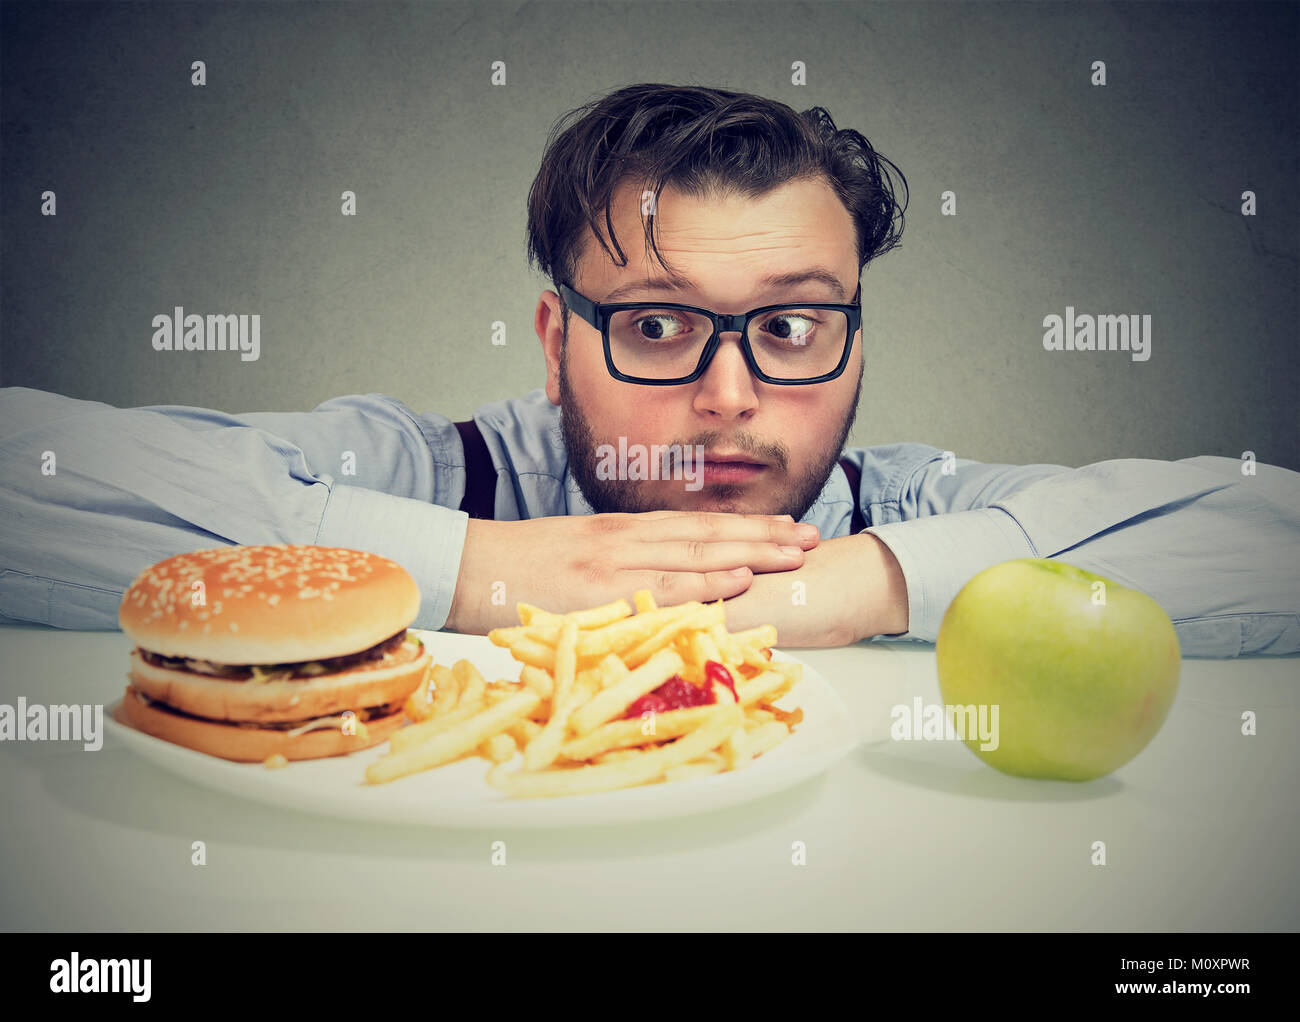 Young chunky man wanting tempting burger instead of healthy apple looking concerned. Stock Photo